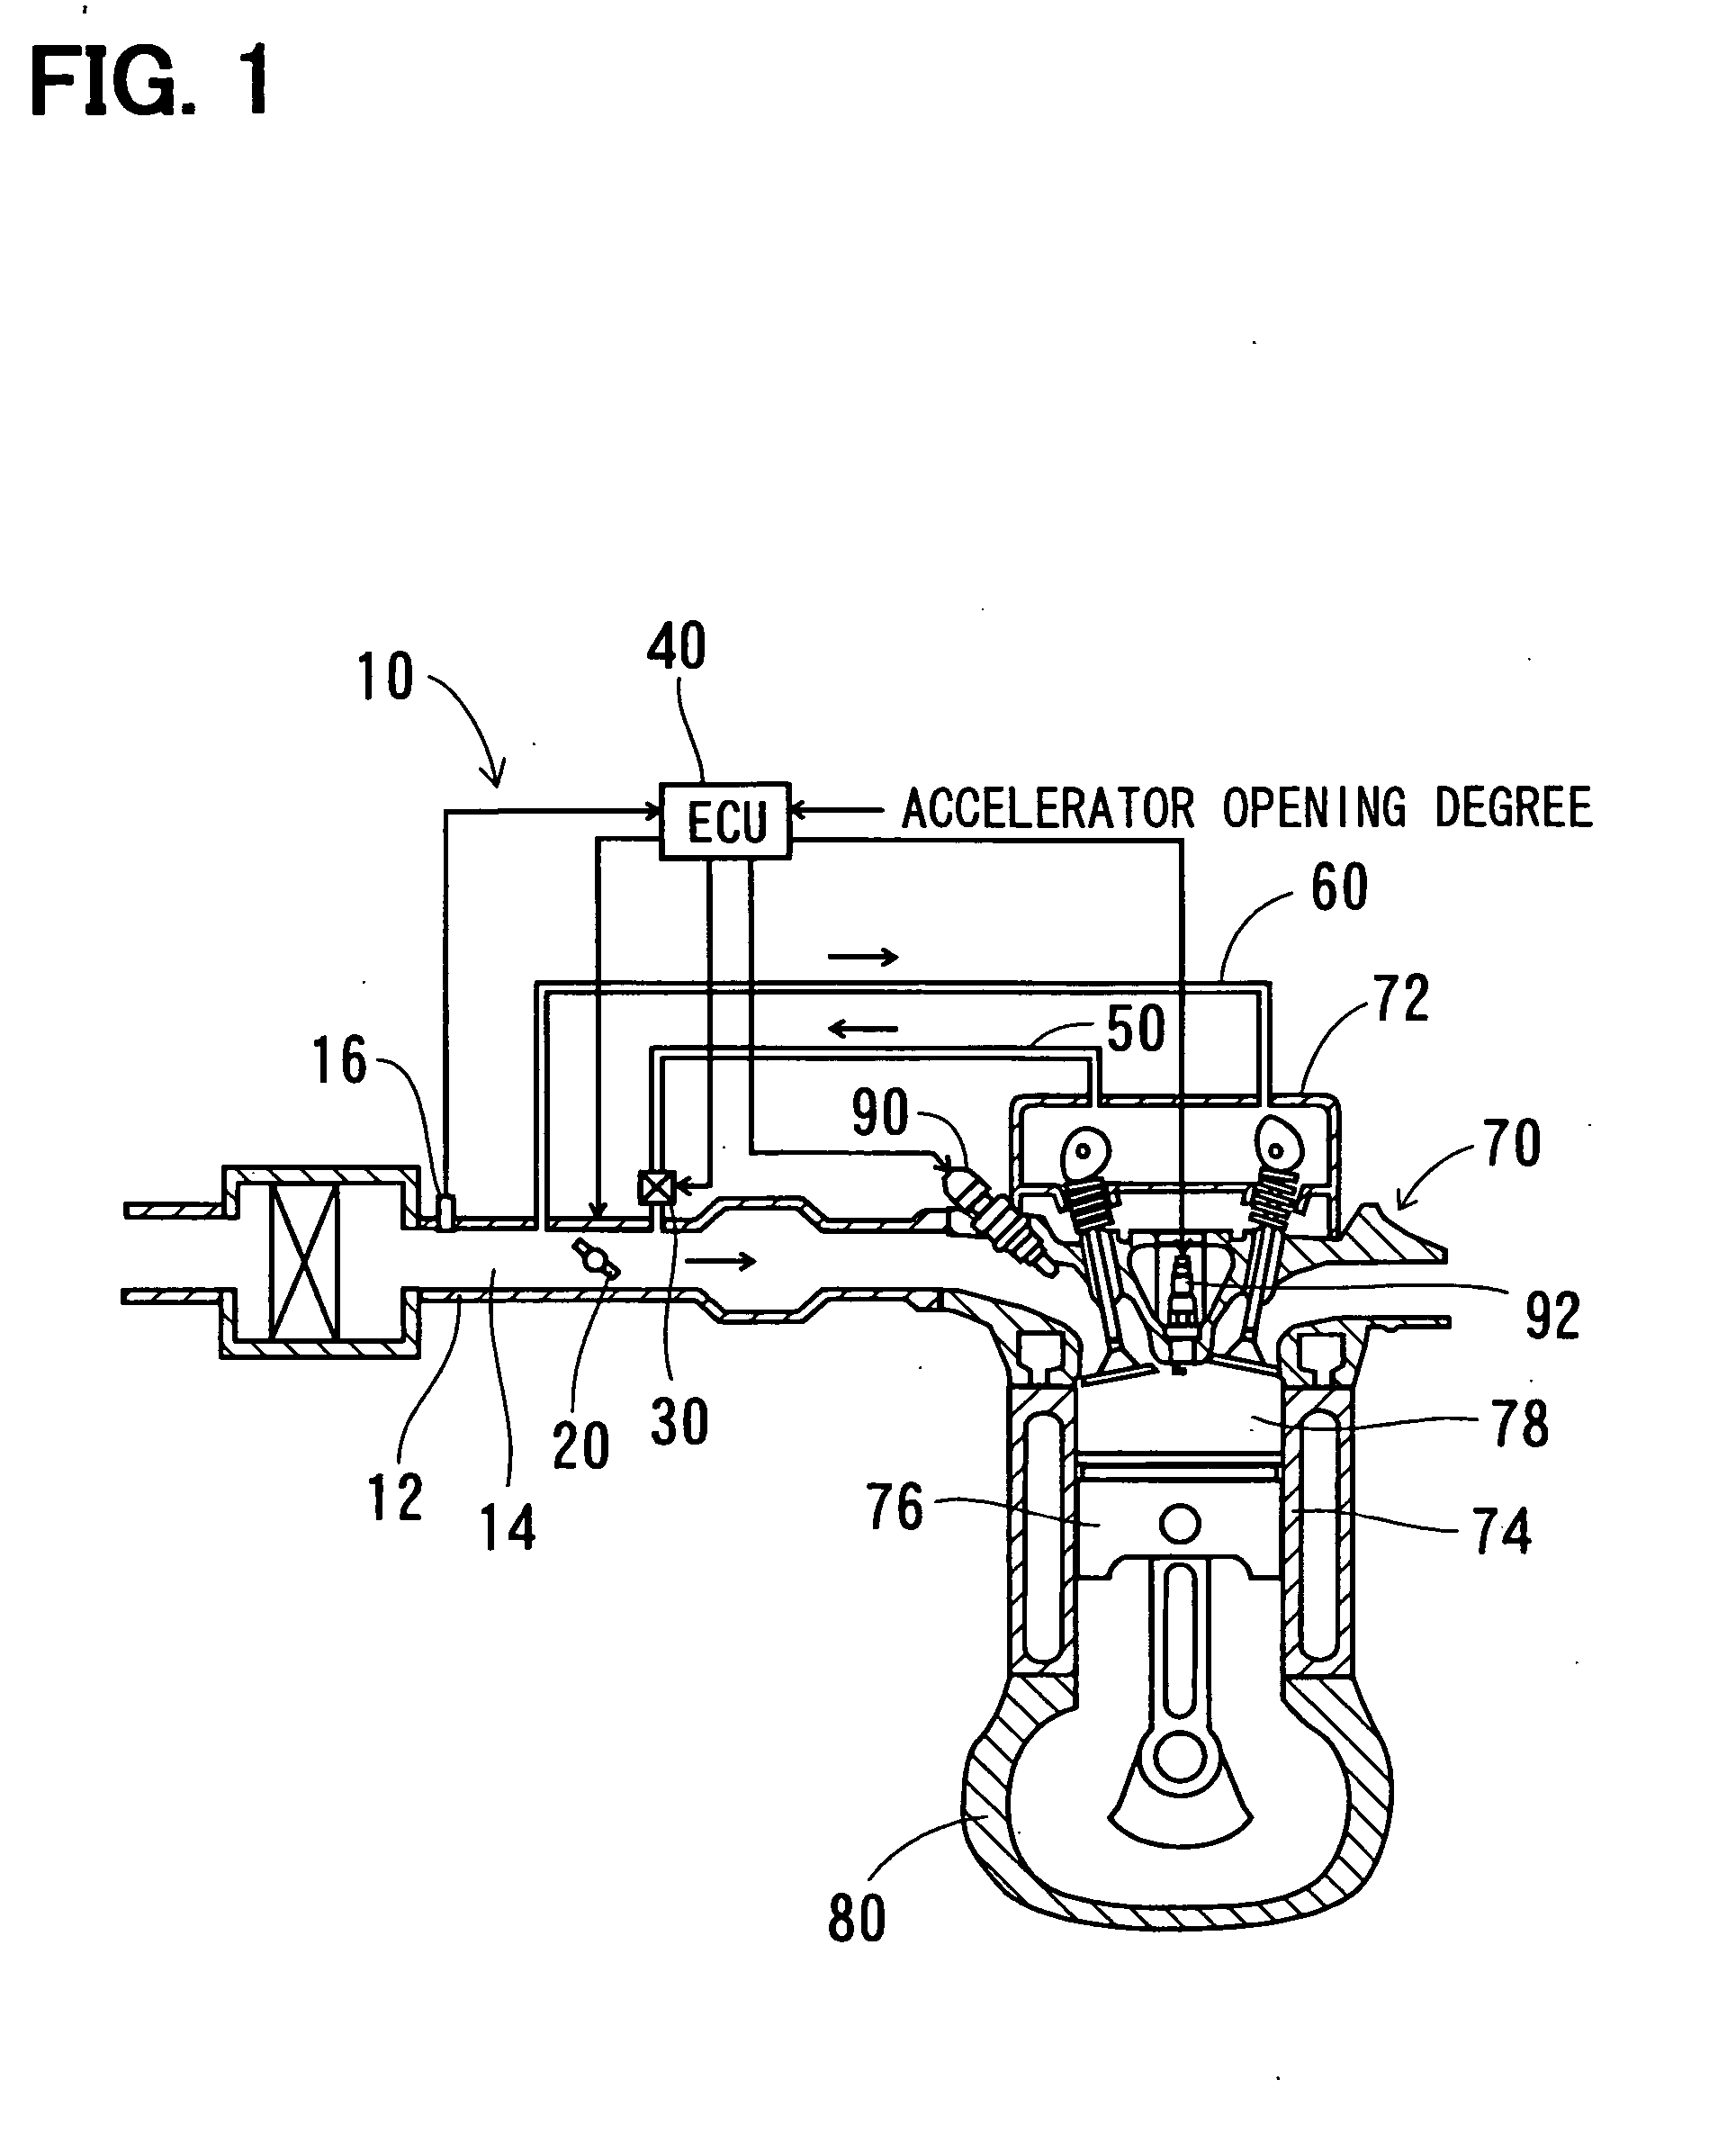 Blow-by gas recirculation system